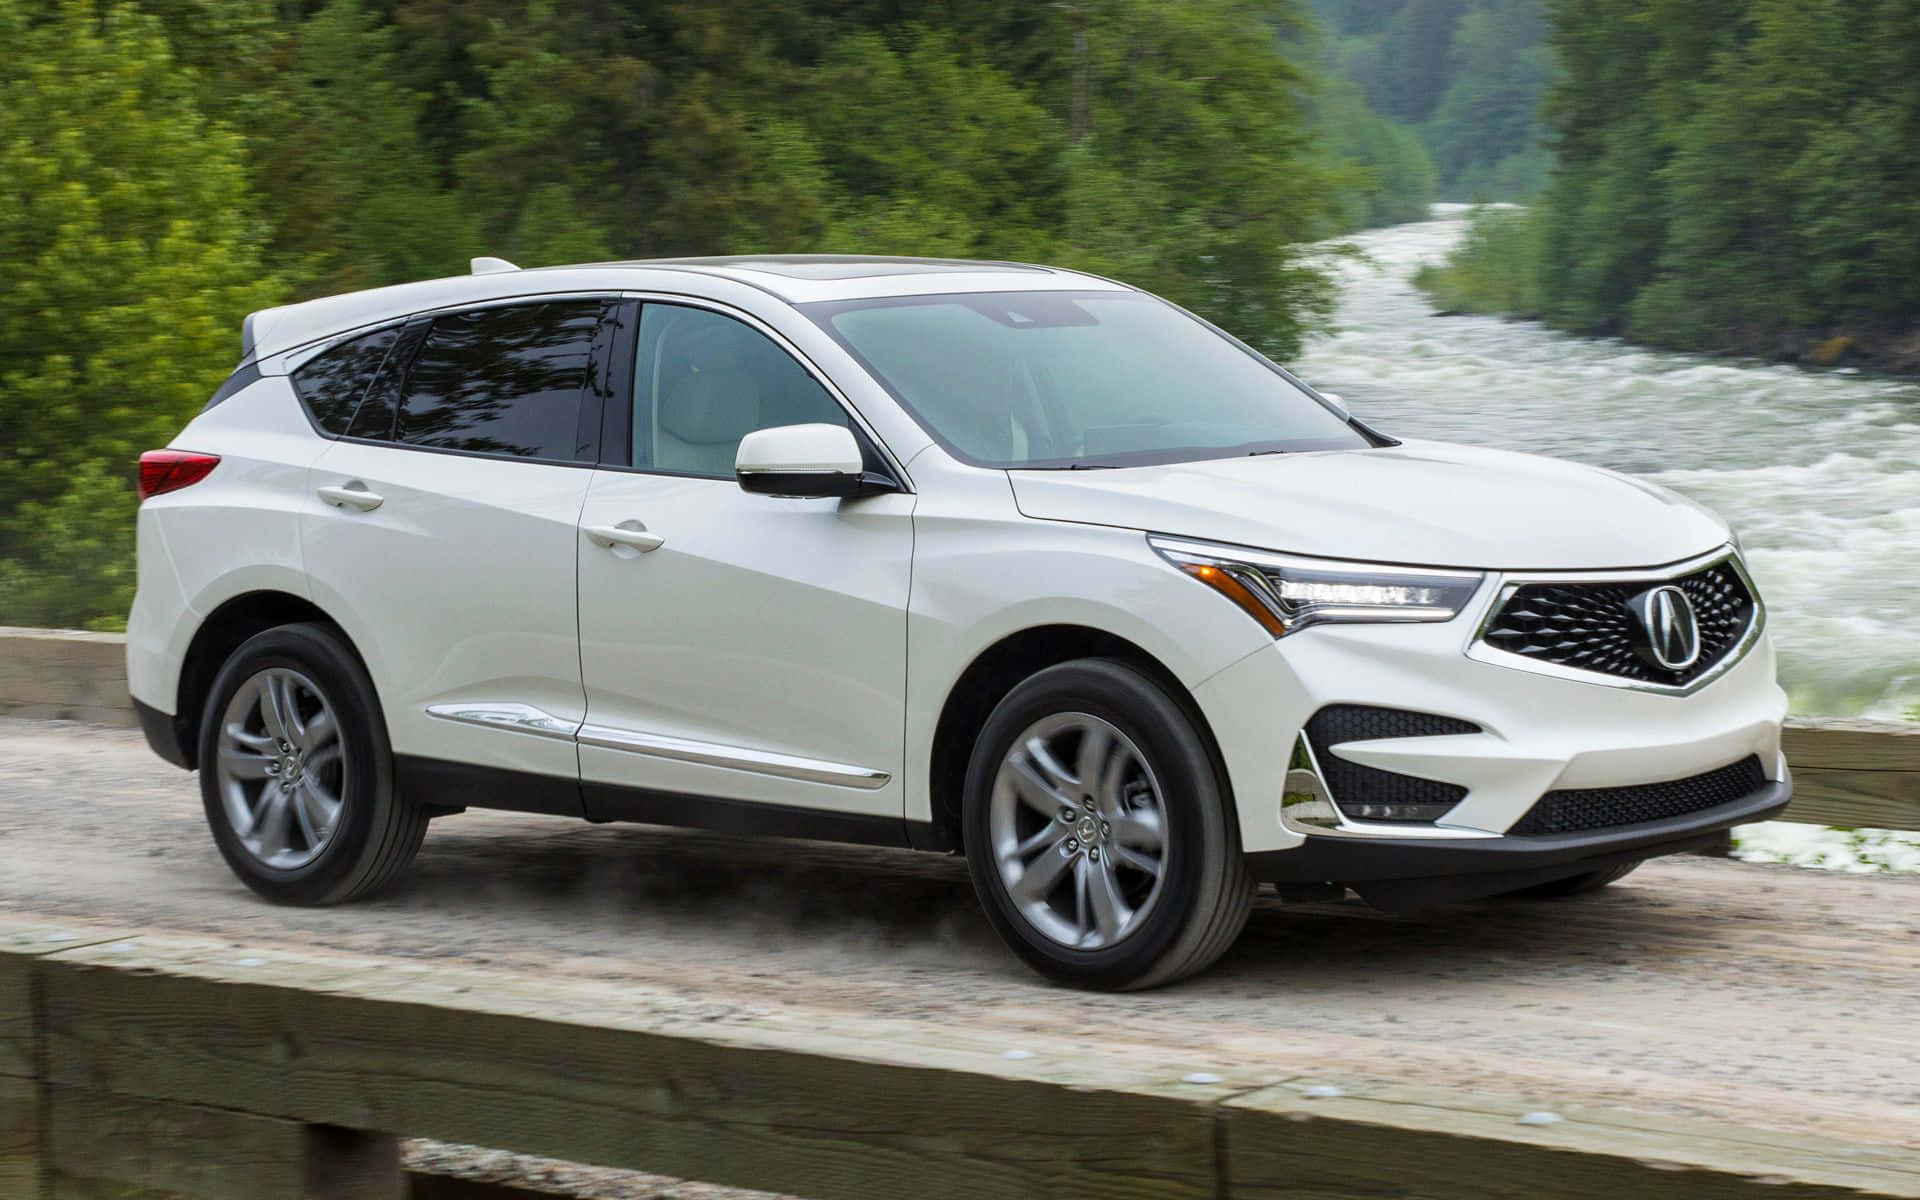 Acura RDX 2022 Model on Picturesque Road Wallpaper